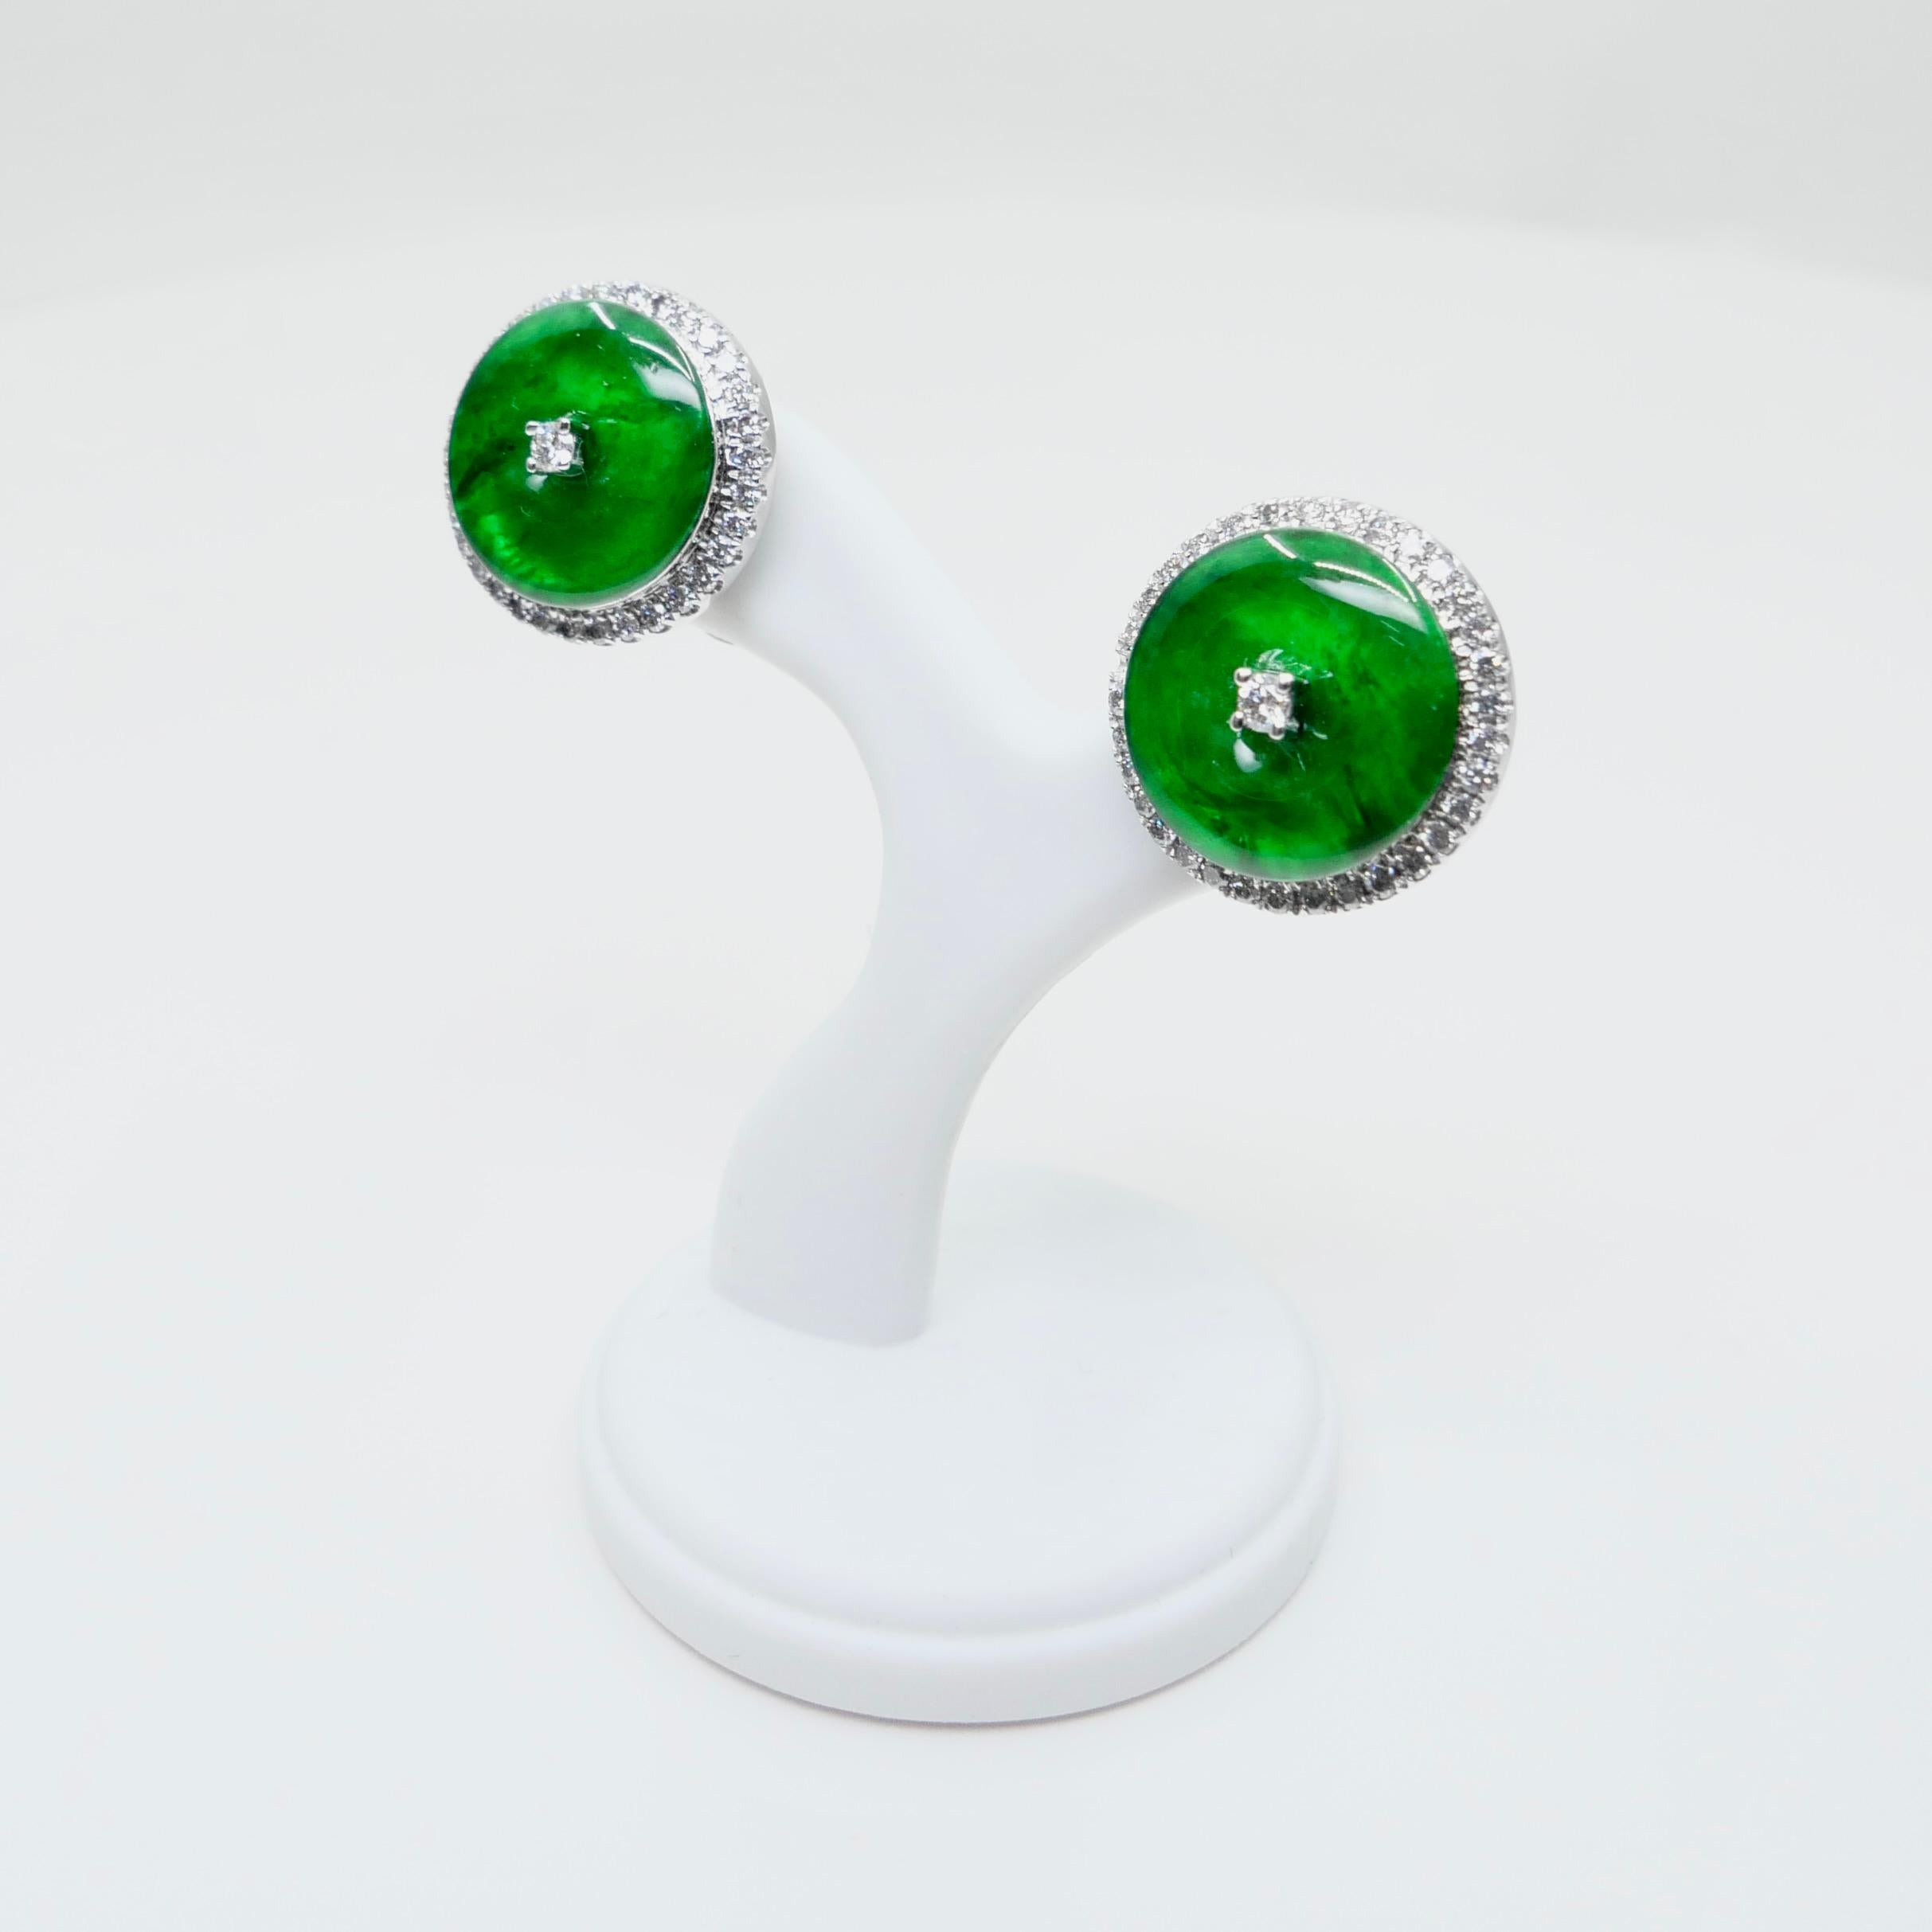 Certified Natural Type A Jadeite Jade And Diamond Earrings. Apple Green Color For Sale 8